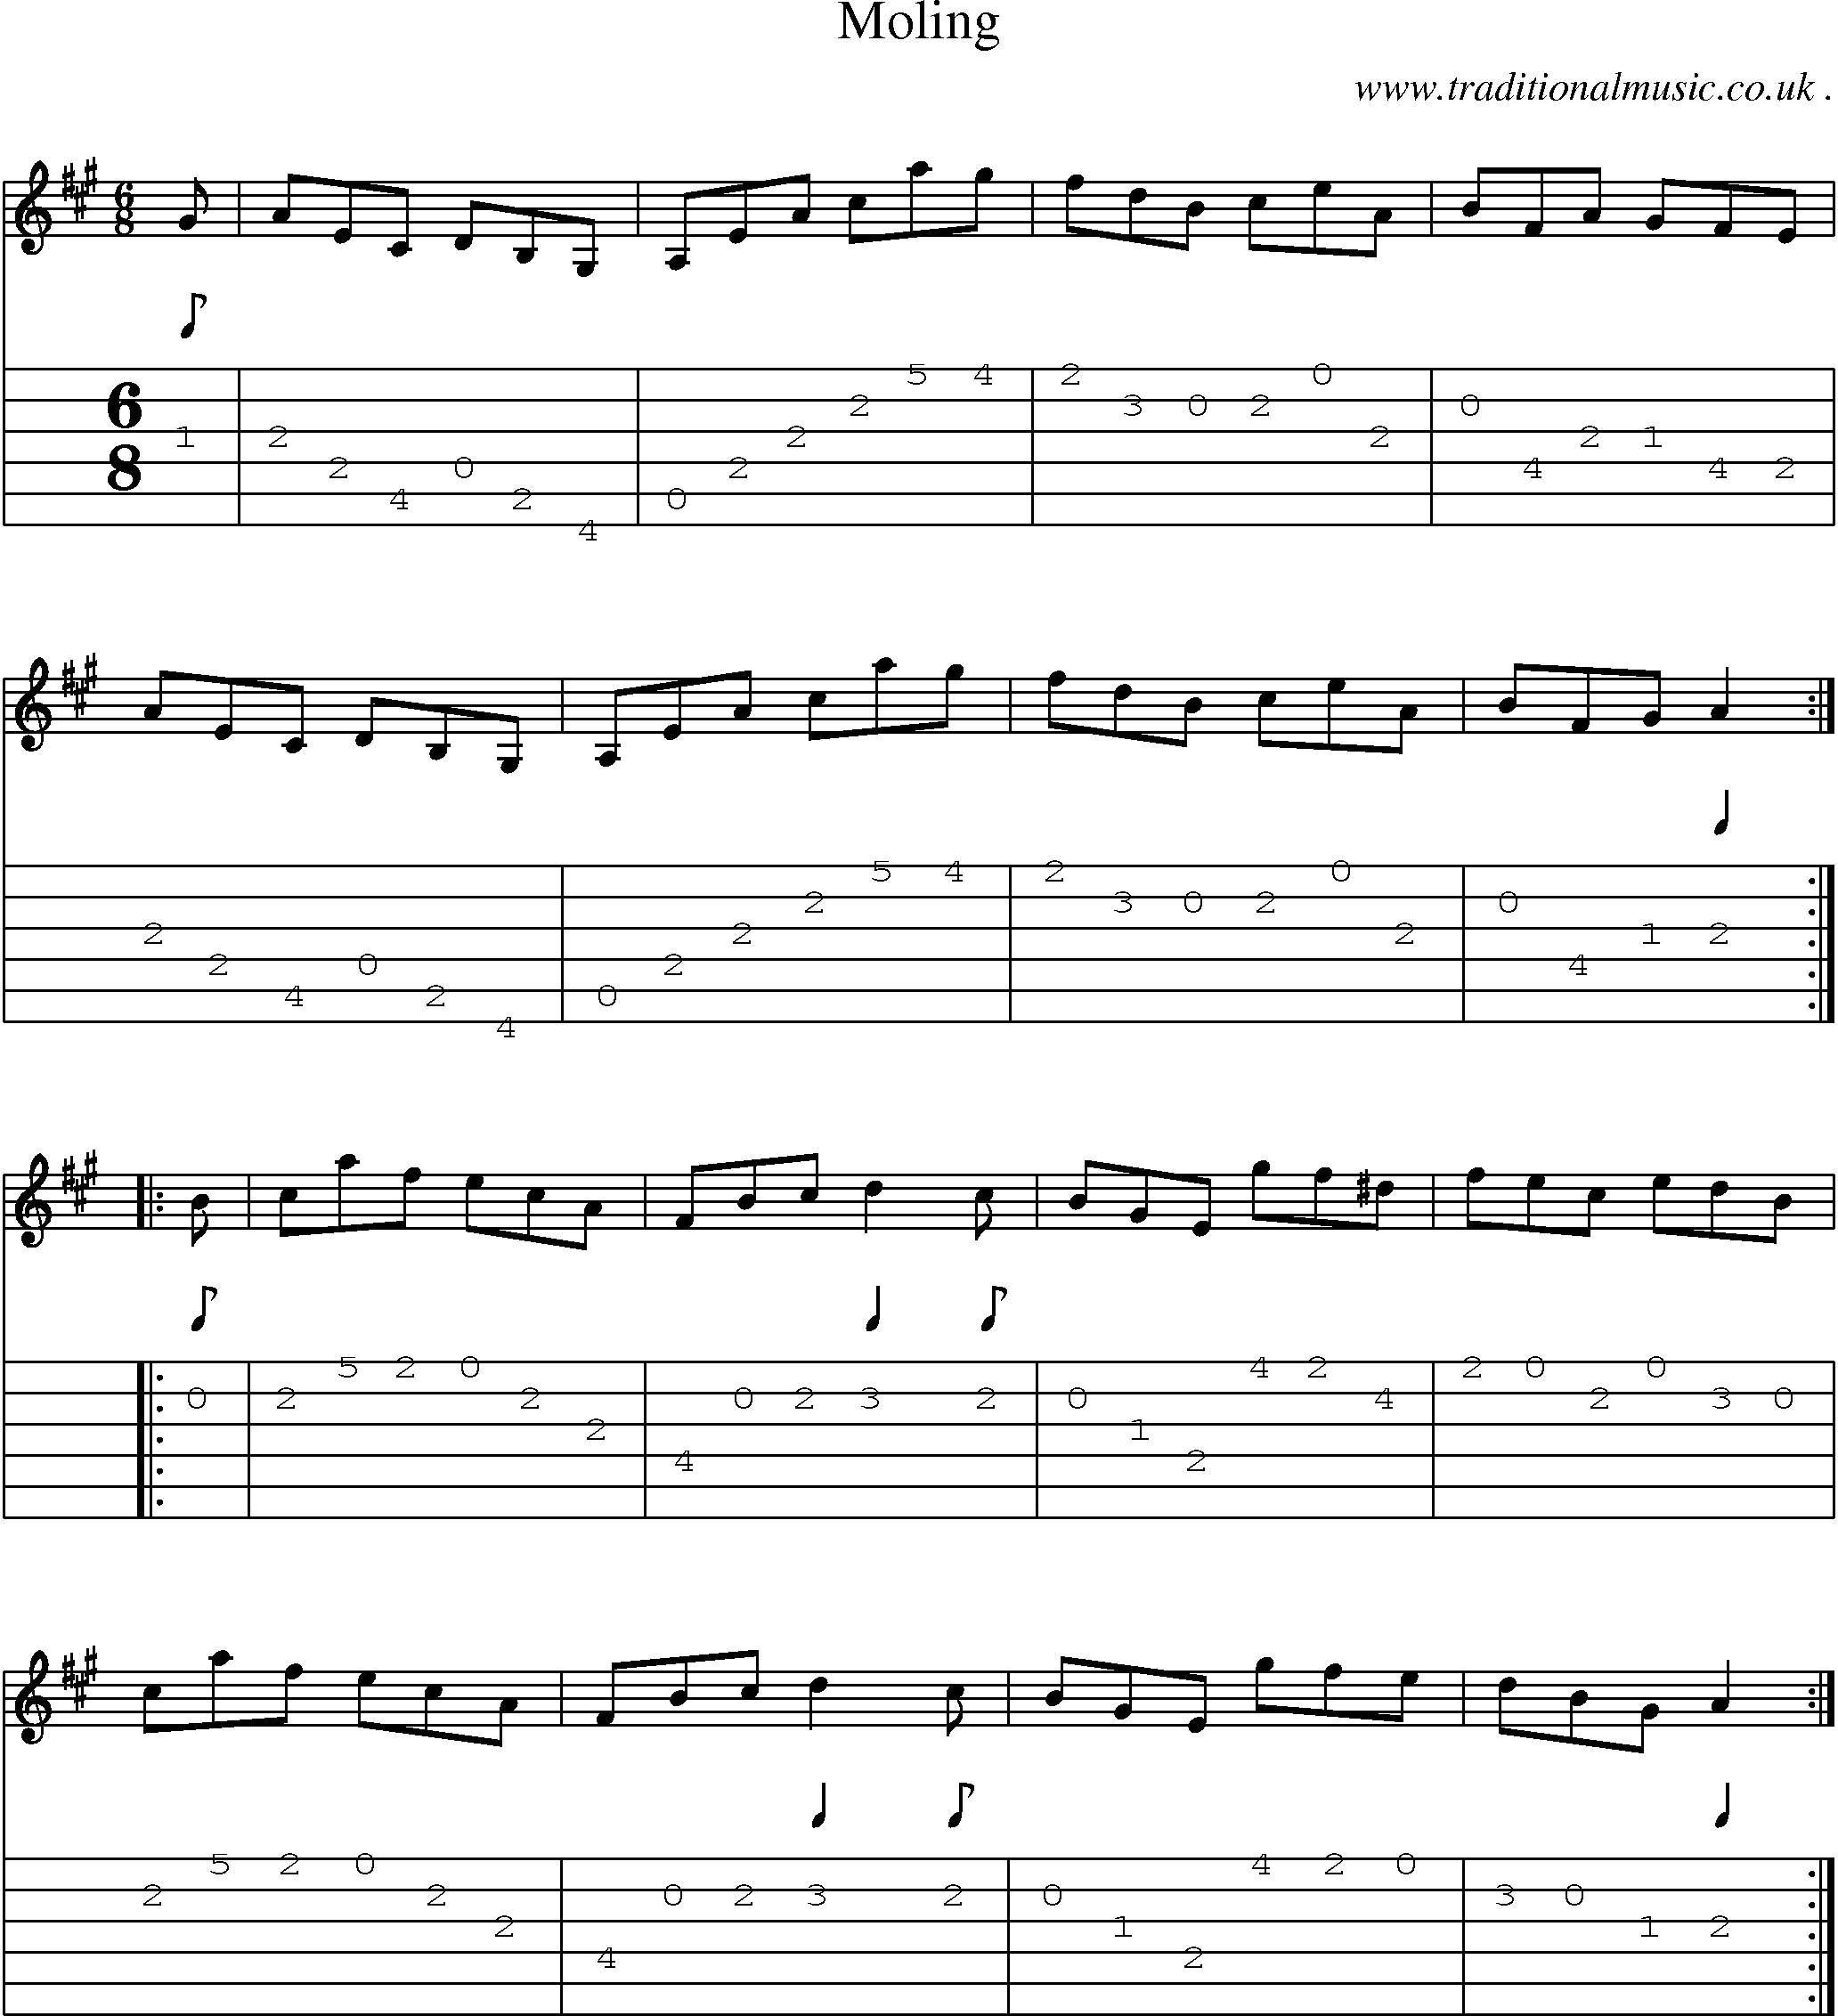 Sheet-Music and Guitar Tabs for Moling